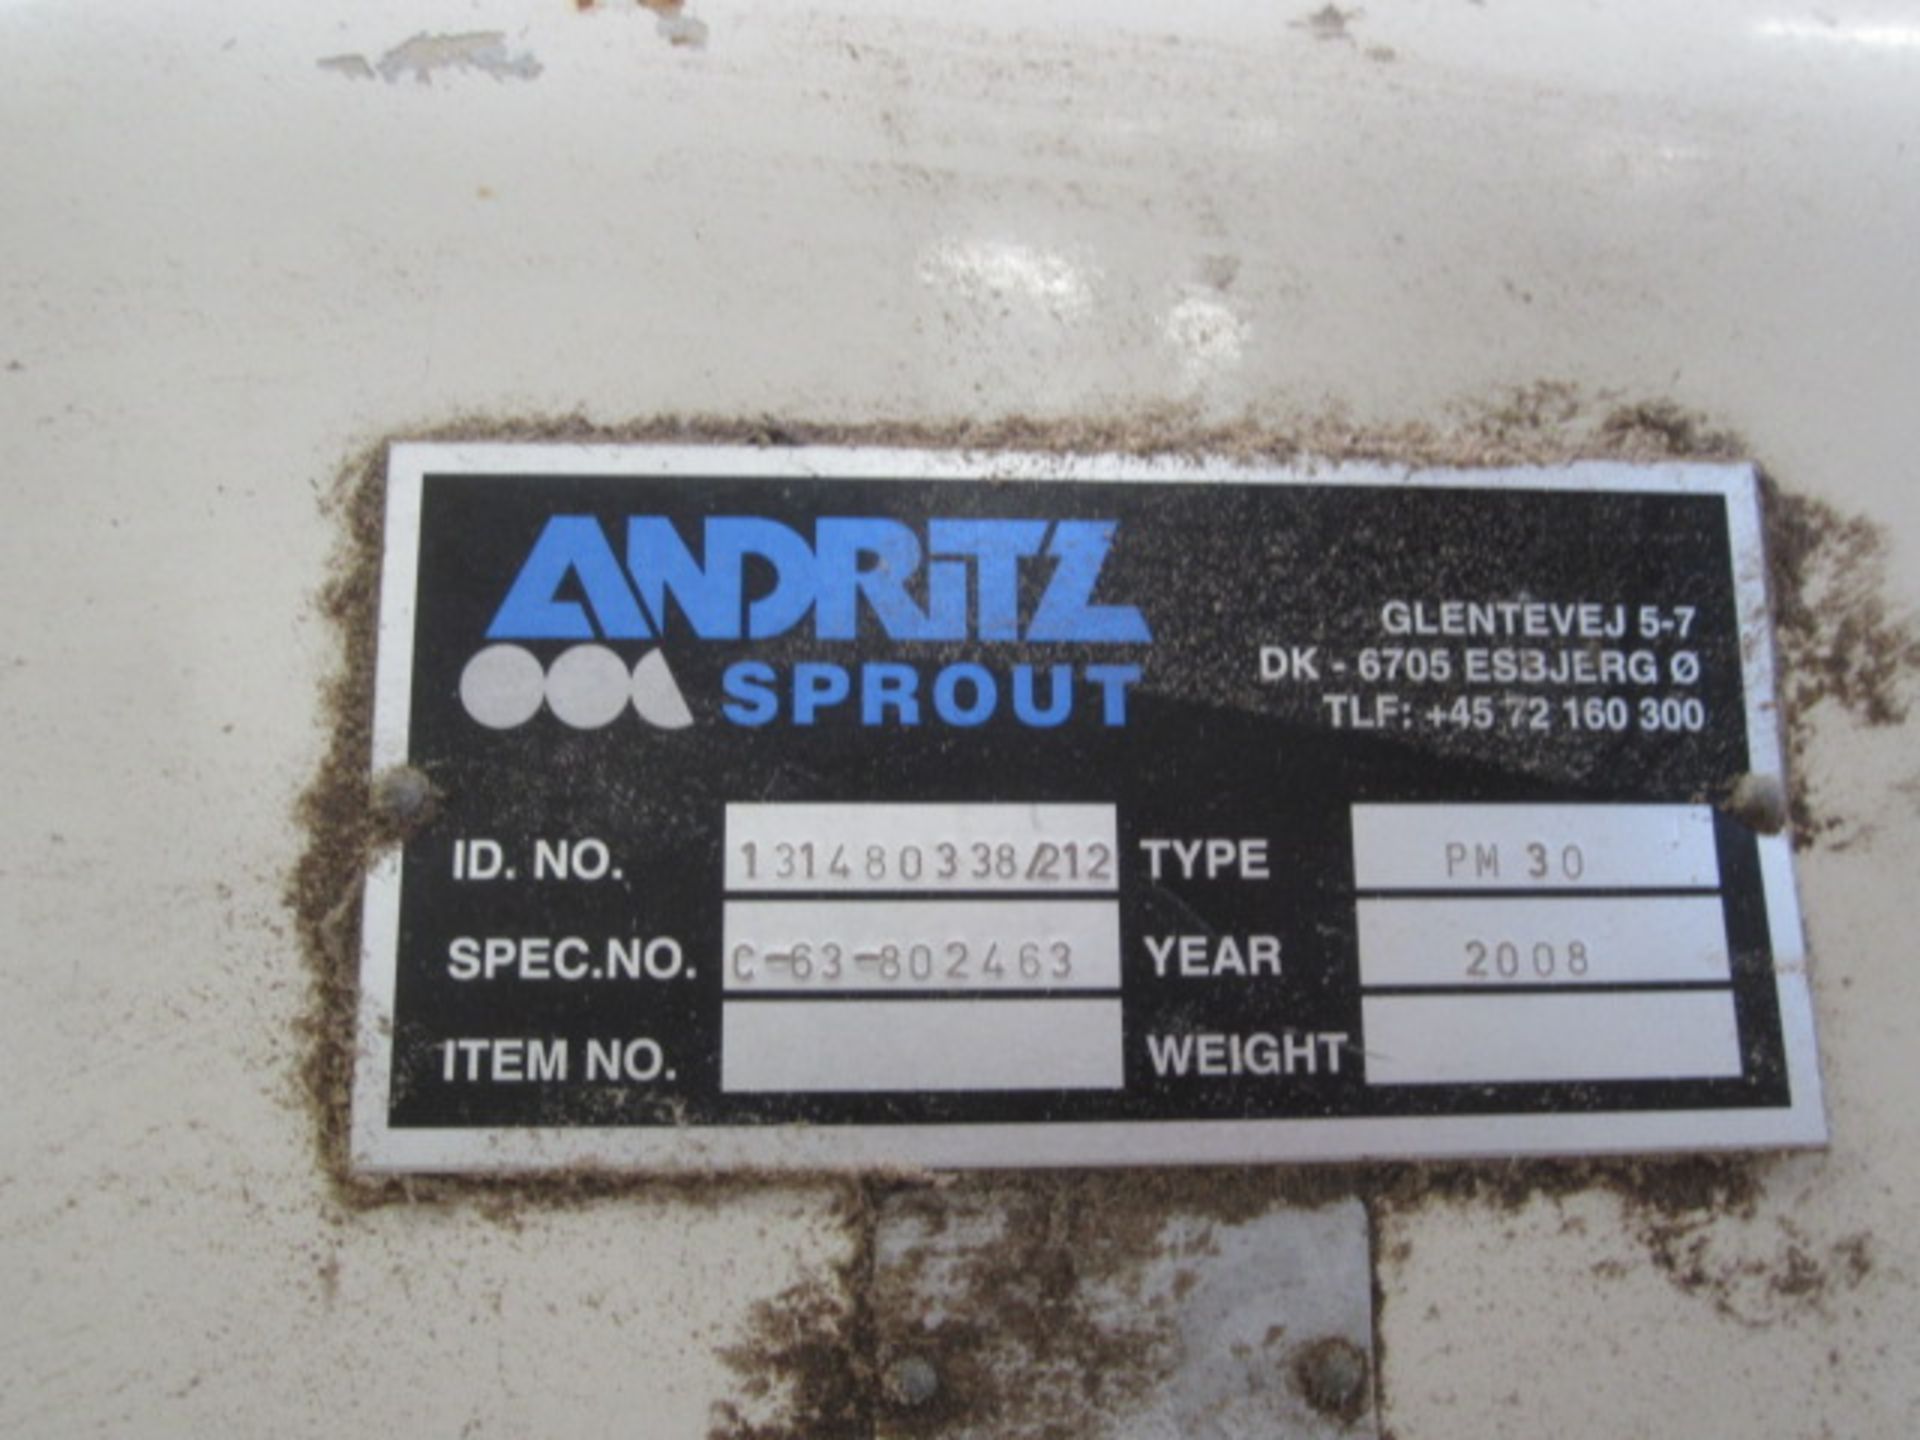 Andritz Sprout PM30 pellet mill, ID no. 131480338/212, spec no. C-63-802463 (2008), mounted on stand - Image 5 of 7